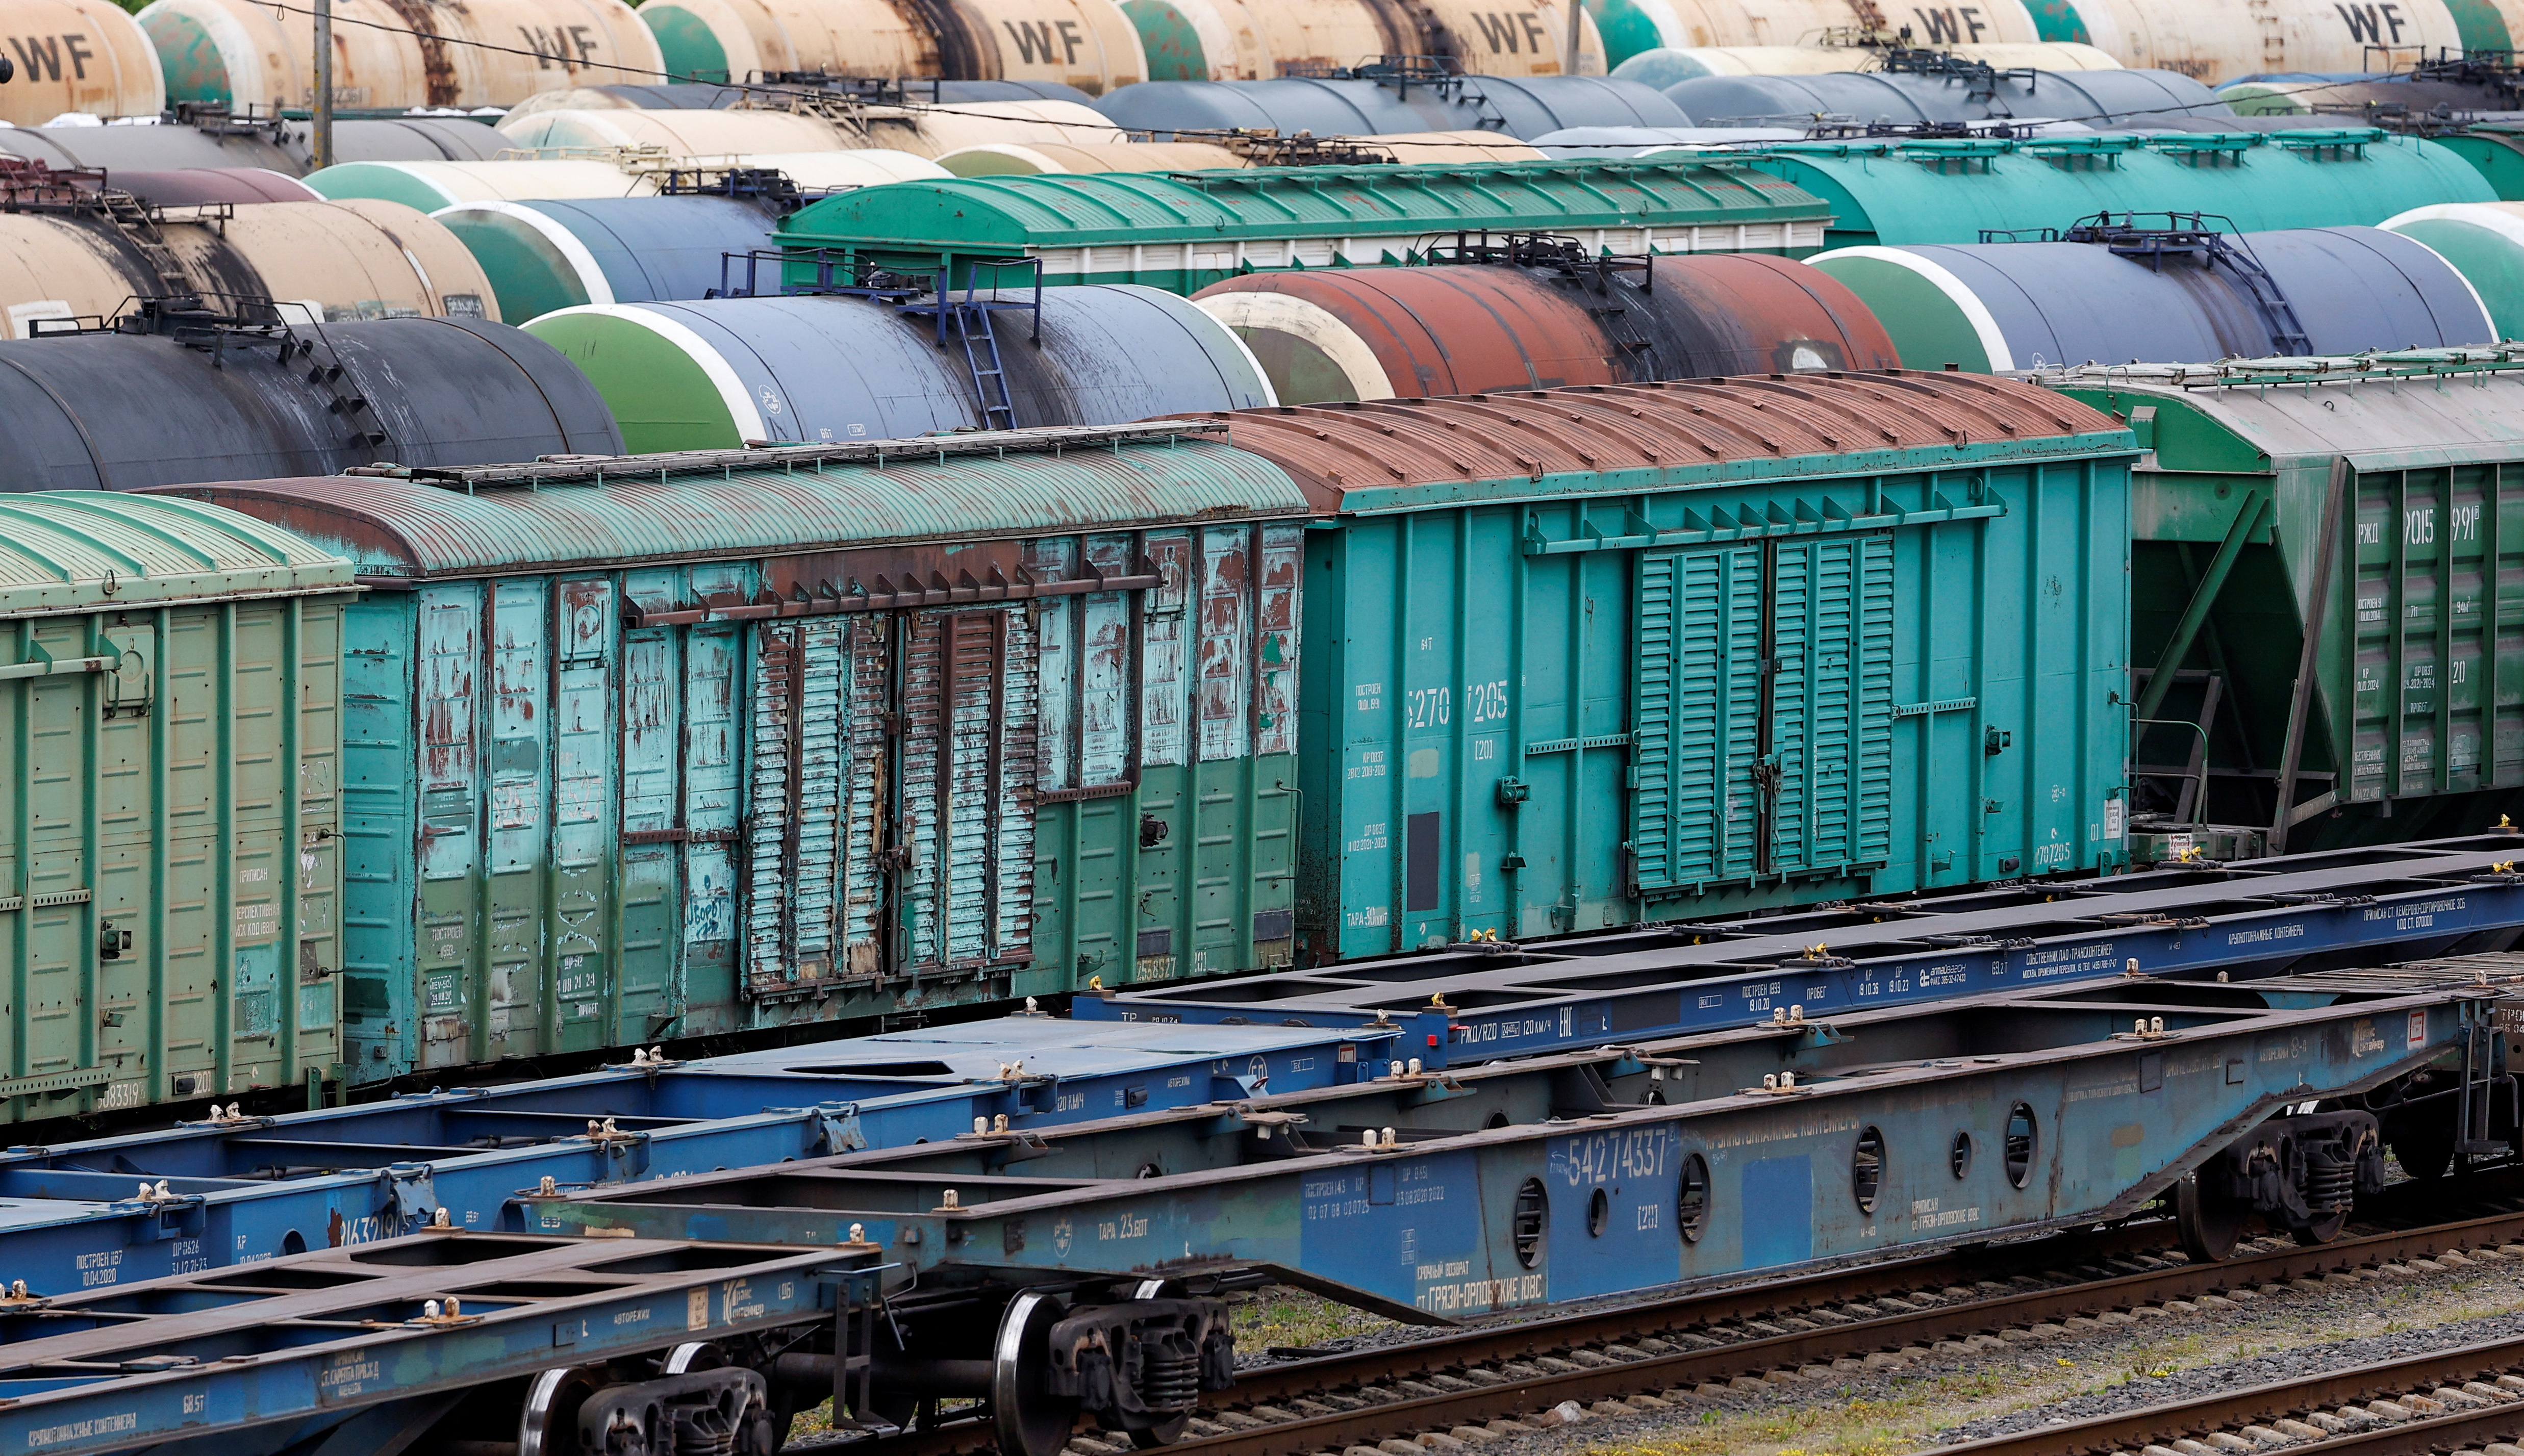 A view shows railway cars in Kaliningrad